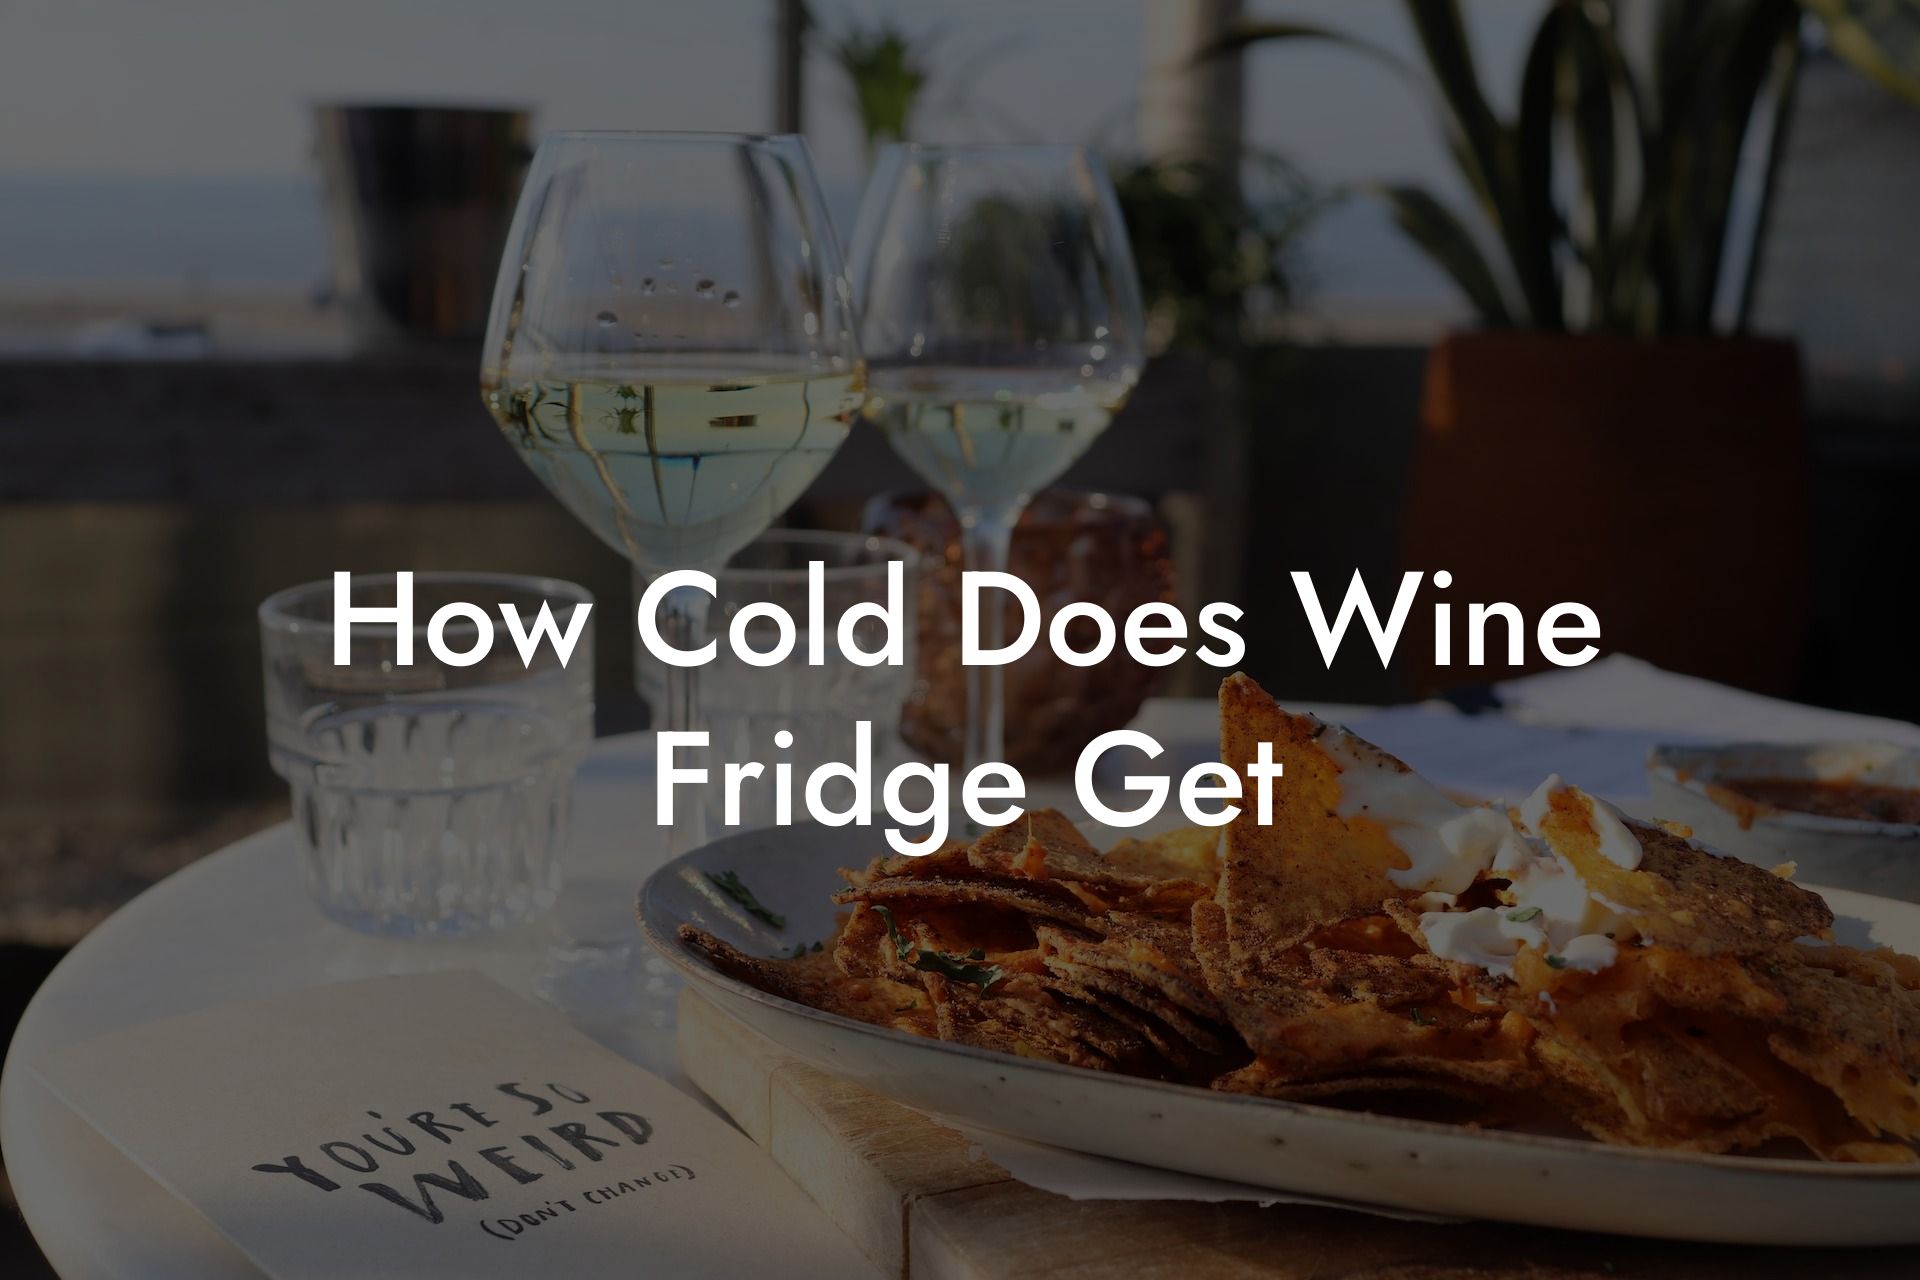 How Cold Does Wine Fridge Get